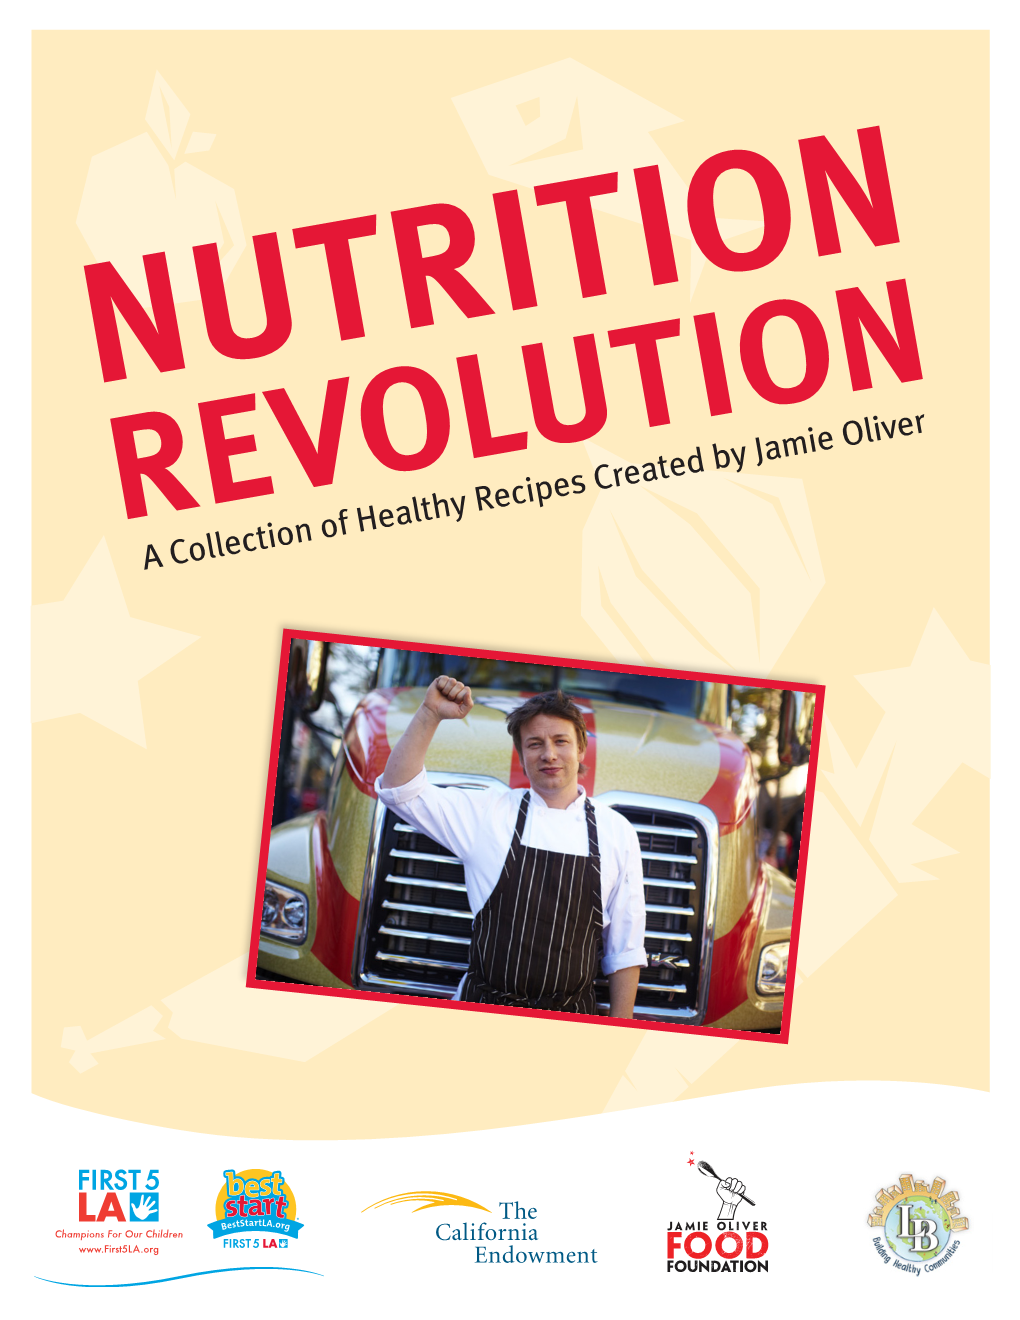 A Collection of Healthy Recipes Created by Jamie Oliver